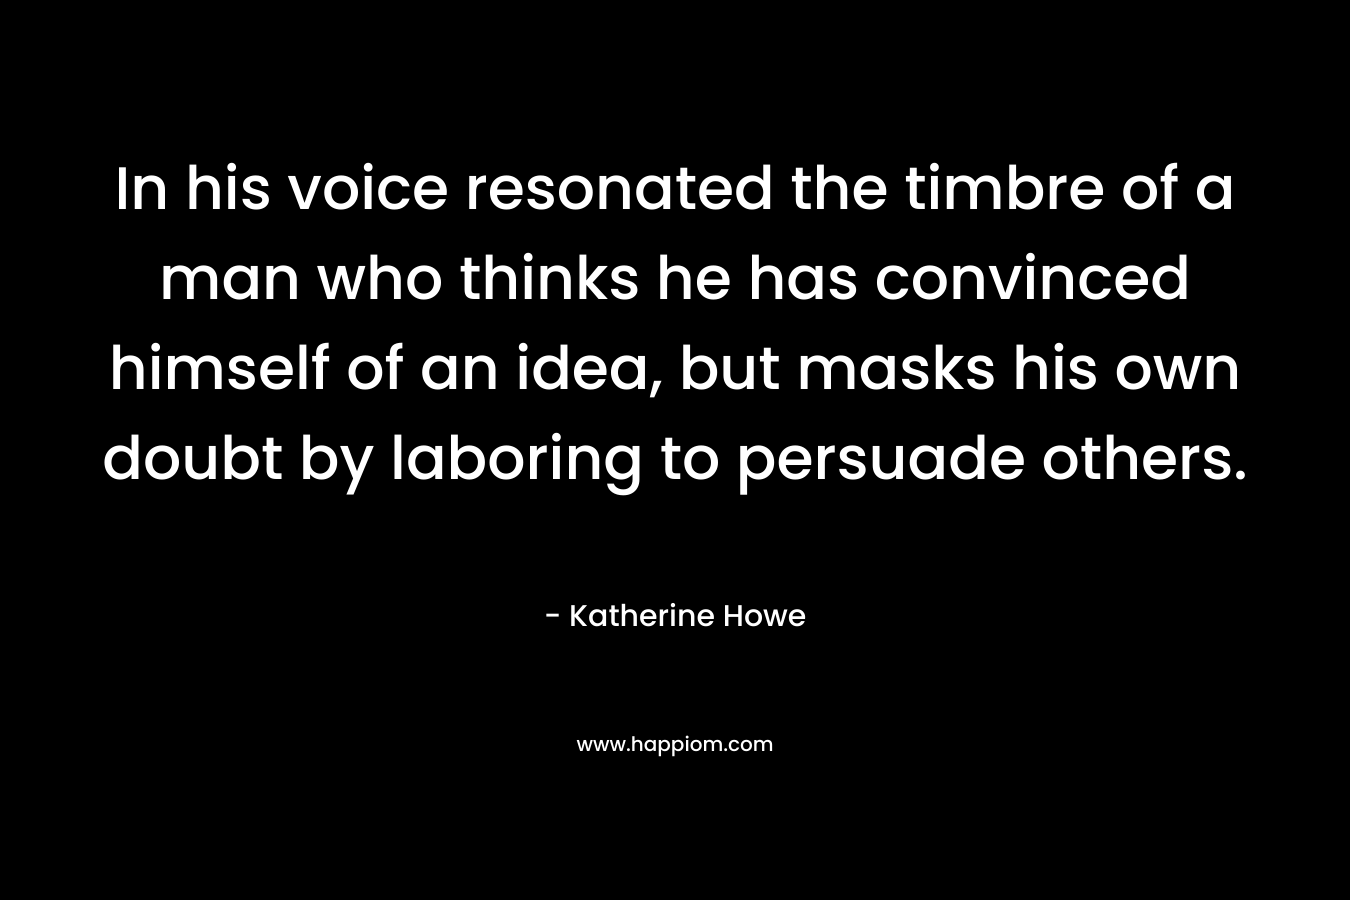 In his voice resonated the timbre of a man who thinks he has convinced himself of an idea, but masks his own doubt by laboring to persuade others.